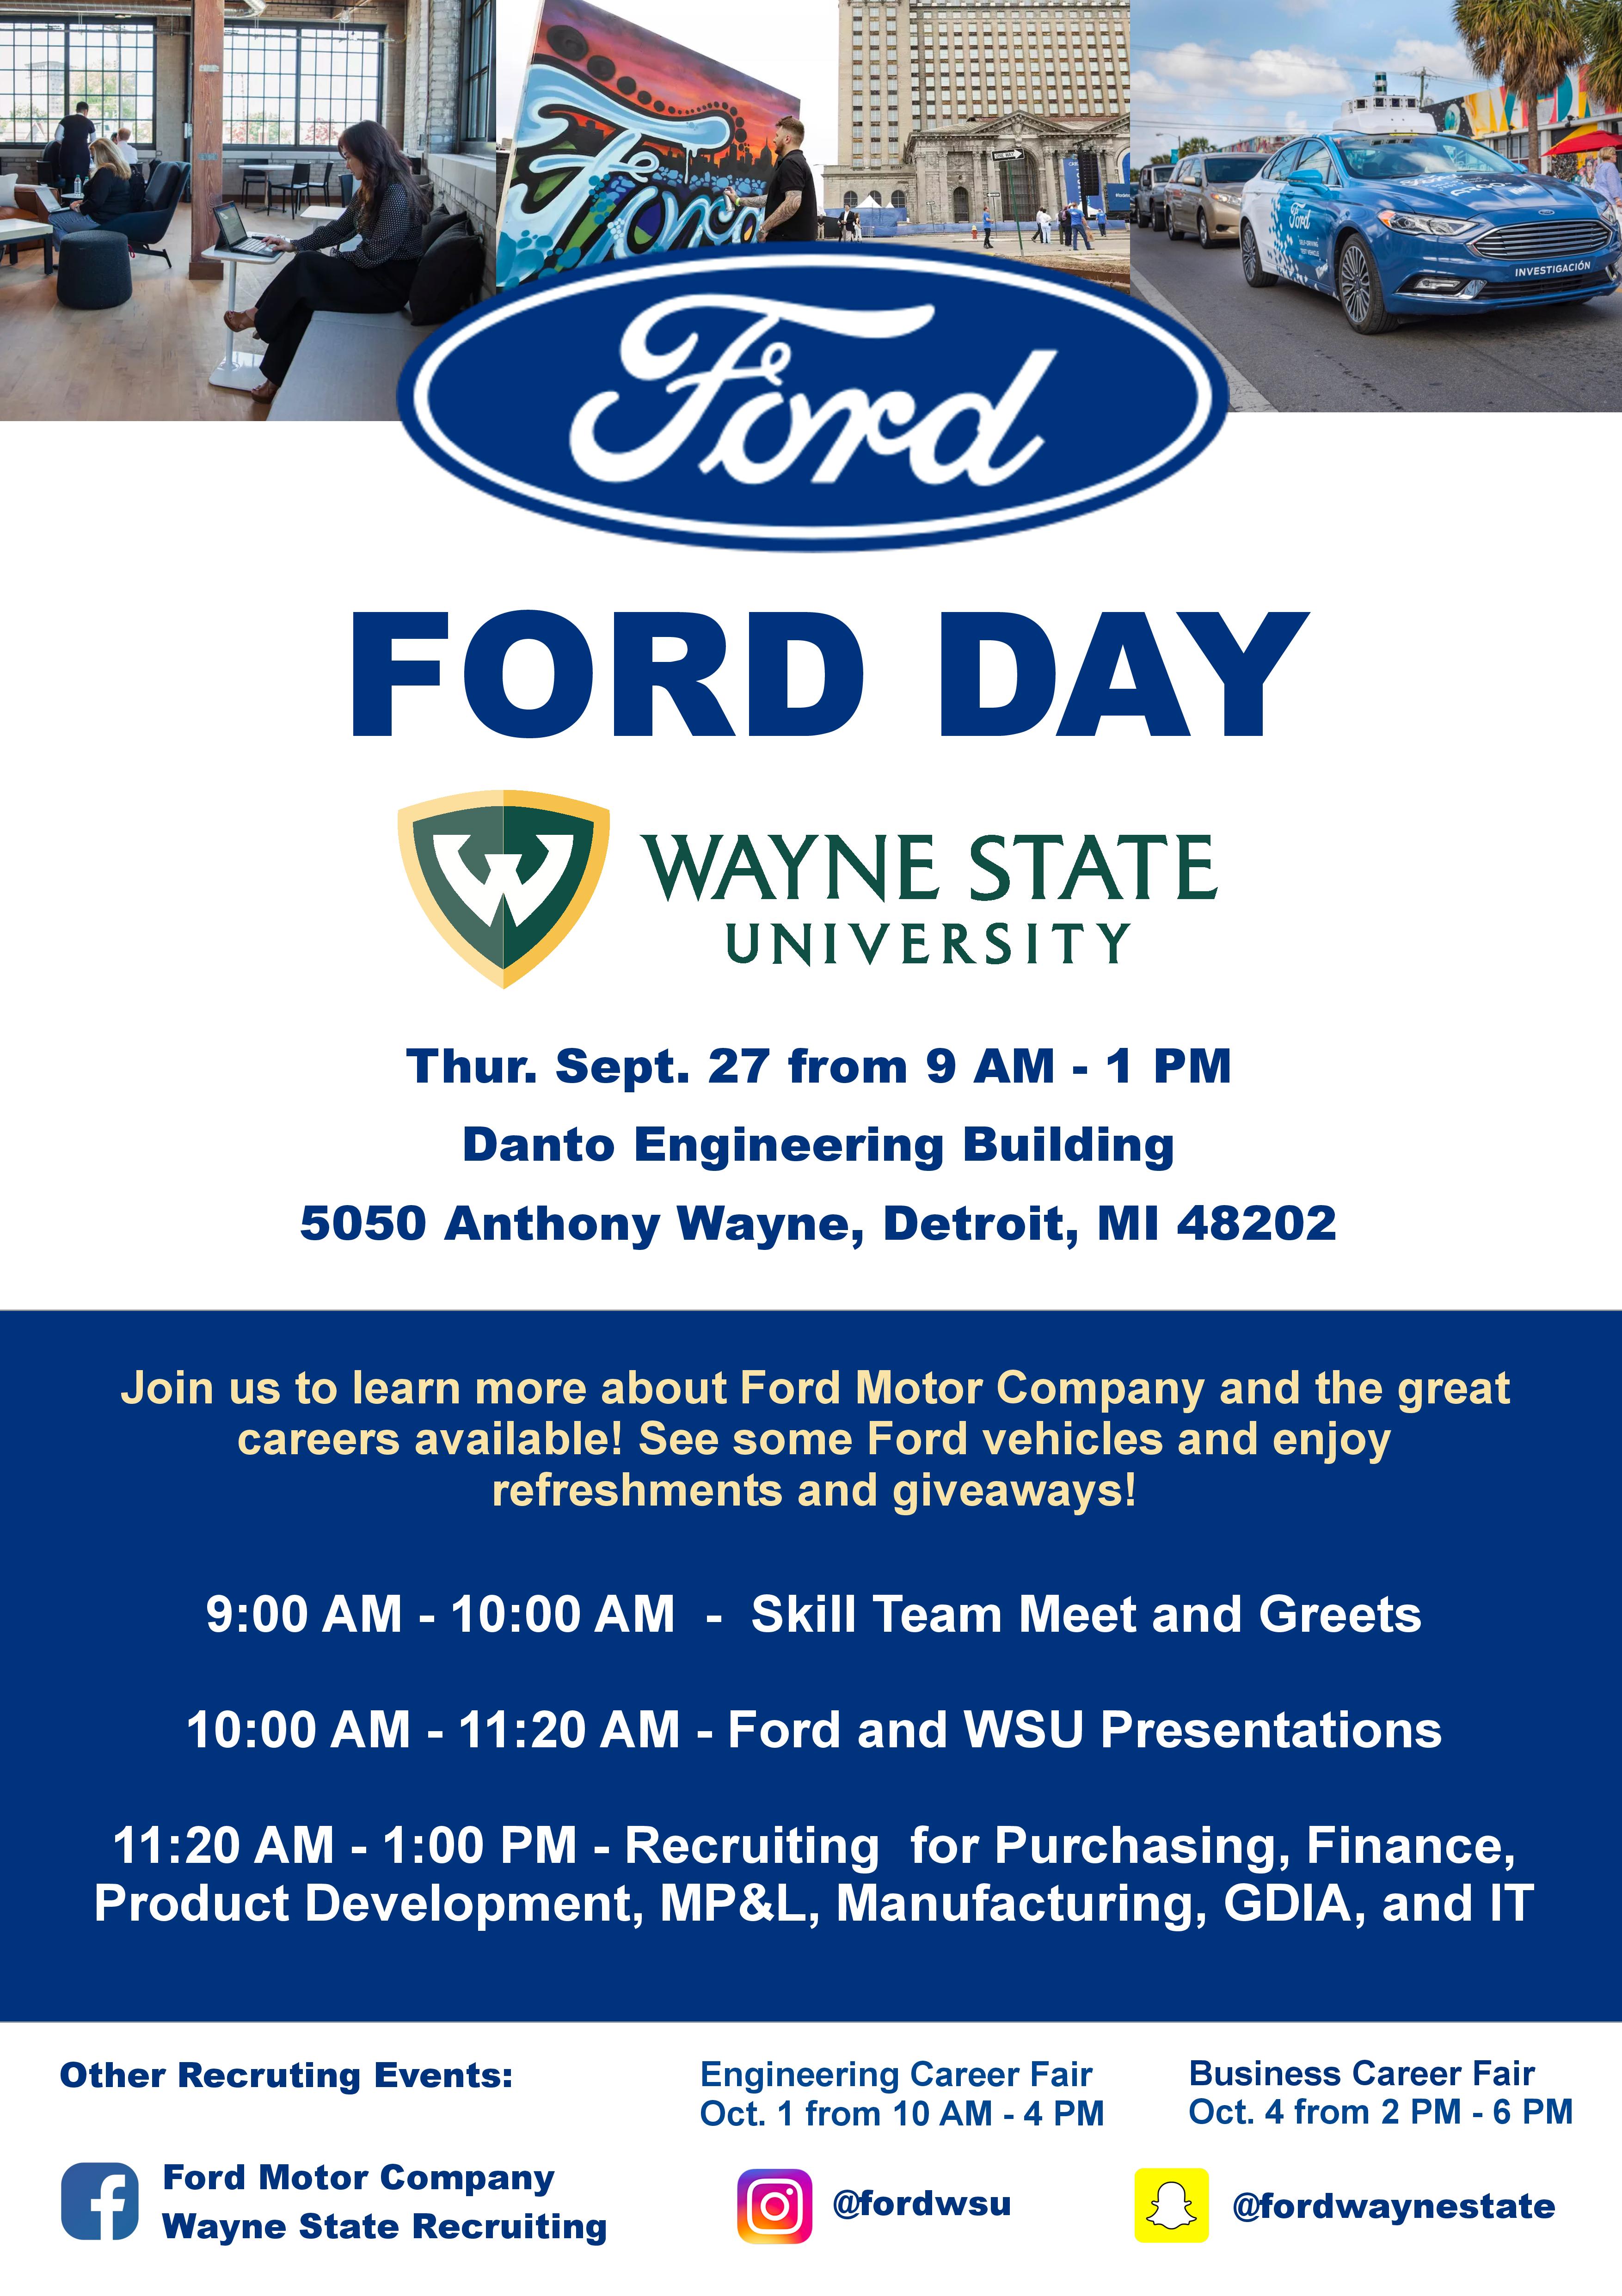 https://ilitchbusiness.wayne.edu/news-images/ford_day_flyer1_-page-001.jpg